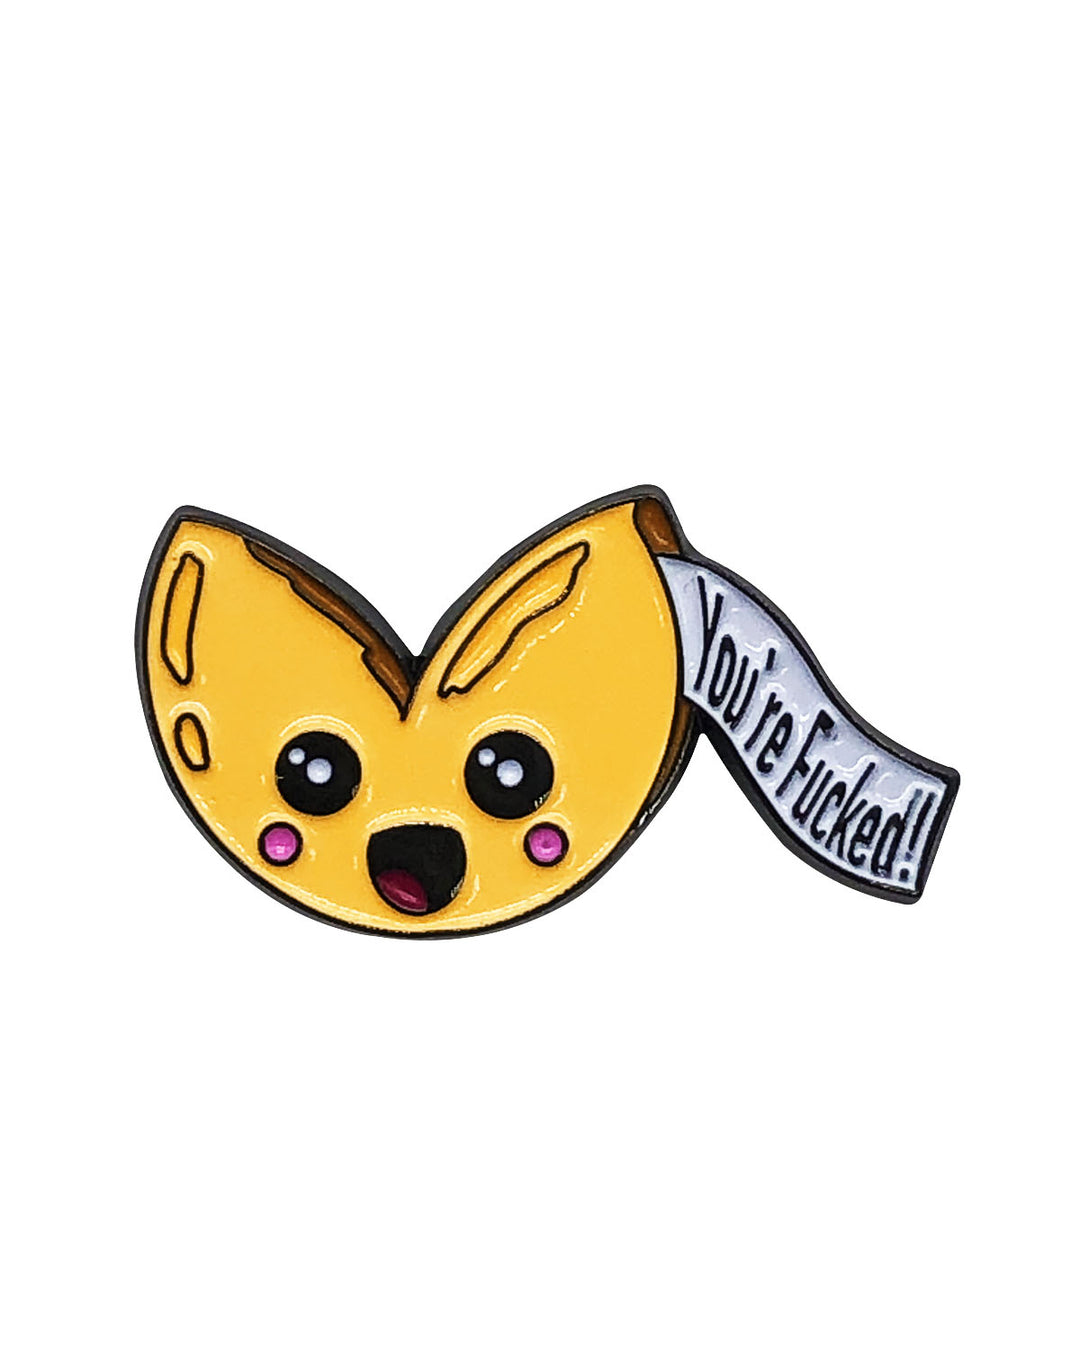 Sassy Fortune Cookie Soft Enamel Pin "You're Fucked"